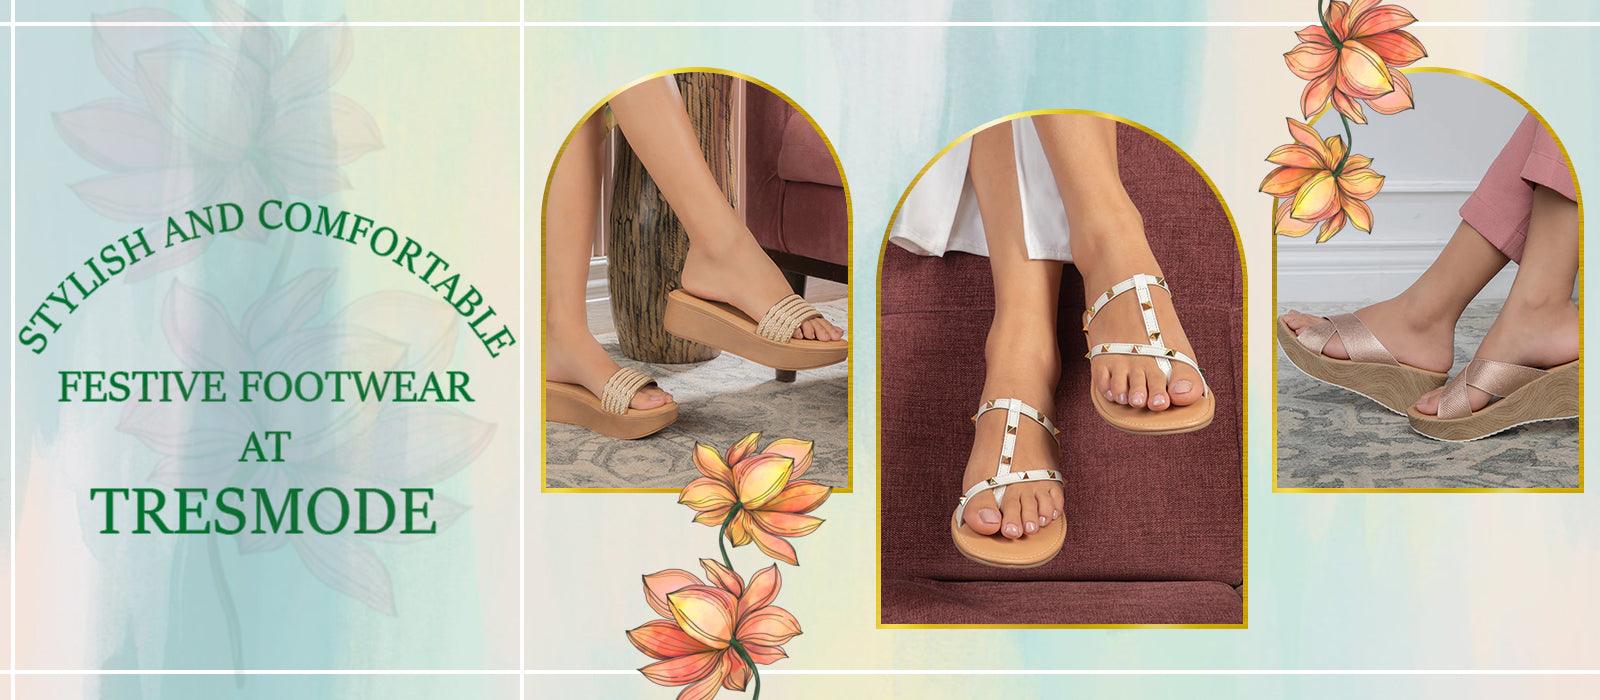 Stylish and Comfortable Festive Footwear at Tresmode - Tresmode